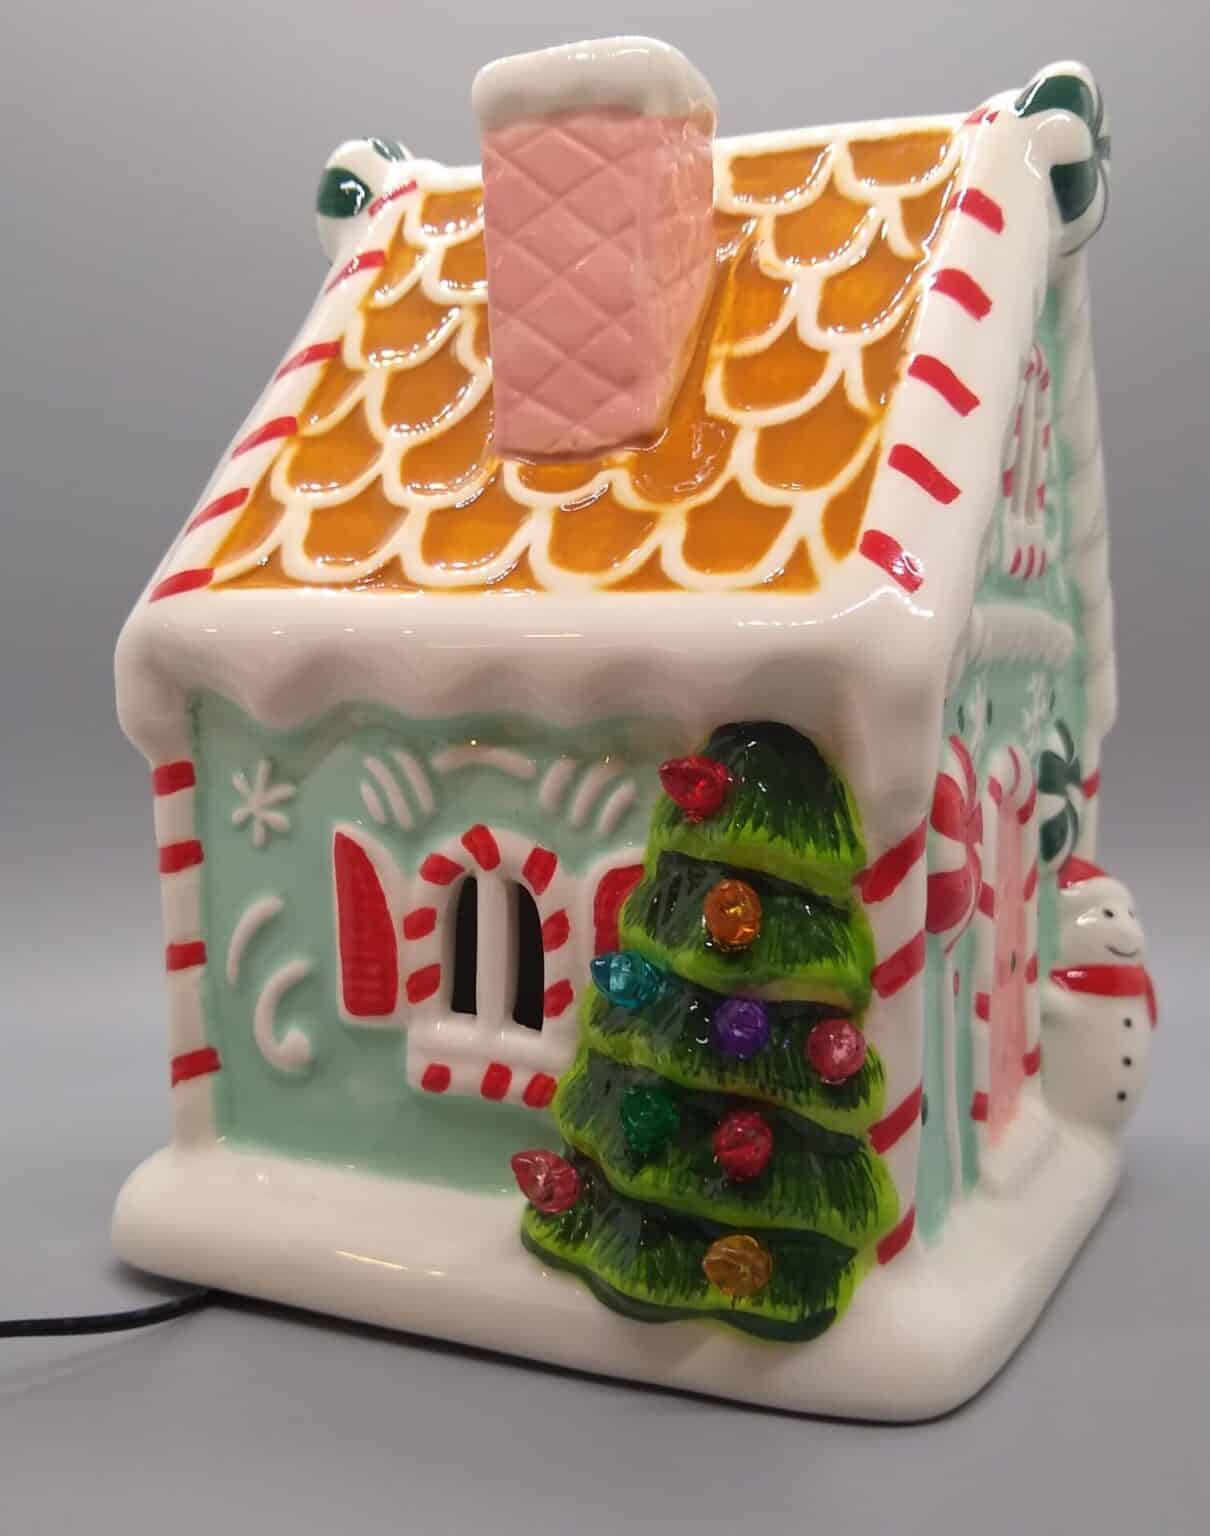 Merry Moments Gingerbread House ALDI REVIEWER